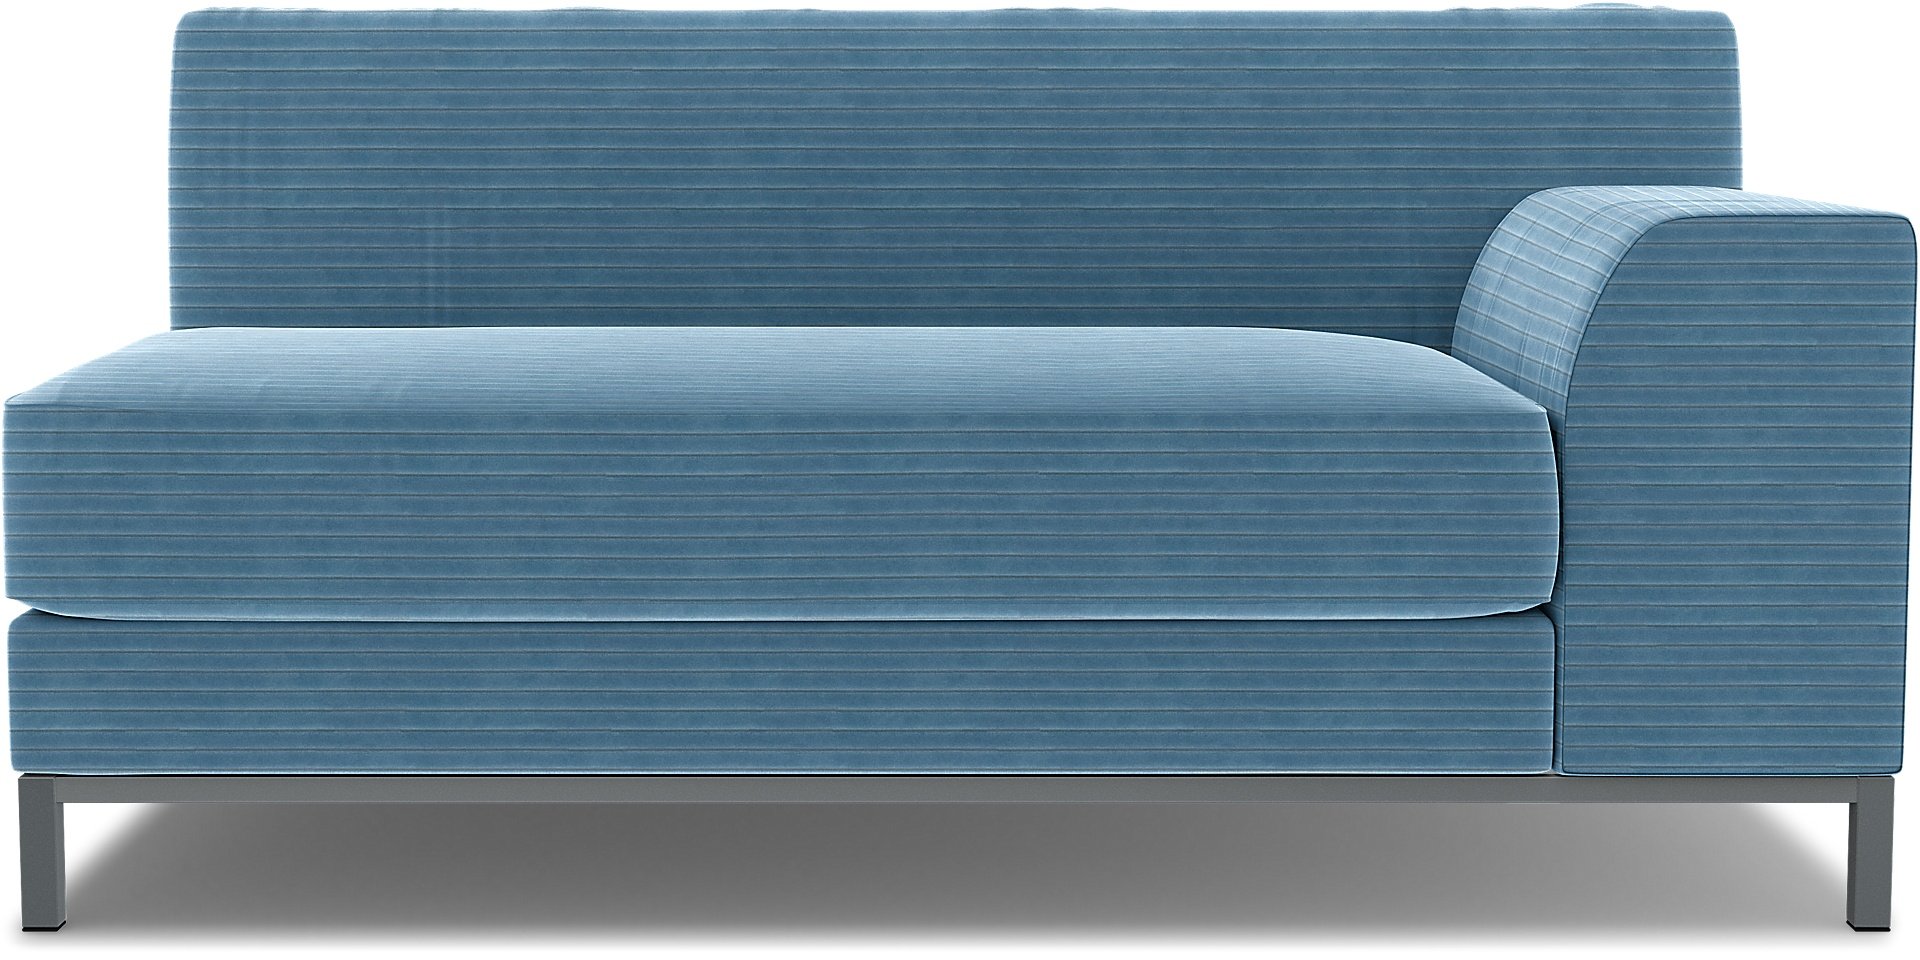 IKEA - Kramfors 2 Seater Sofa with Right Arm Cover, Sky Blue, Corduroy - Bemz